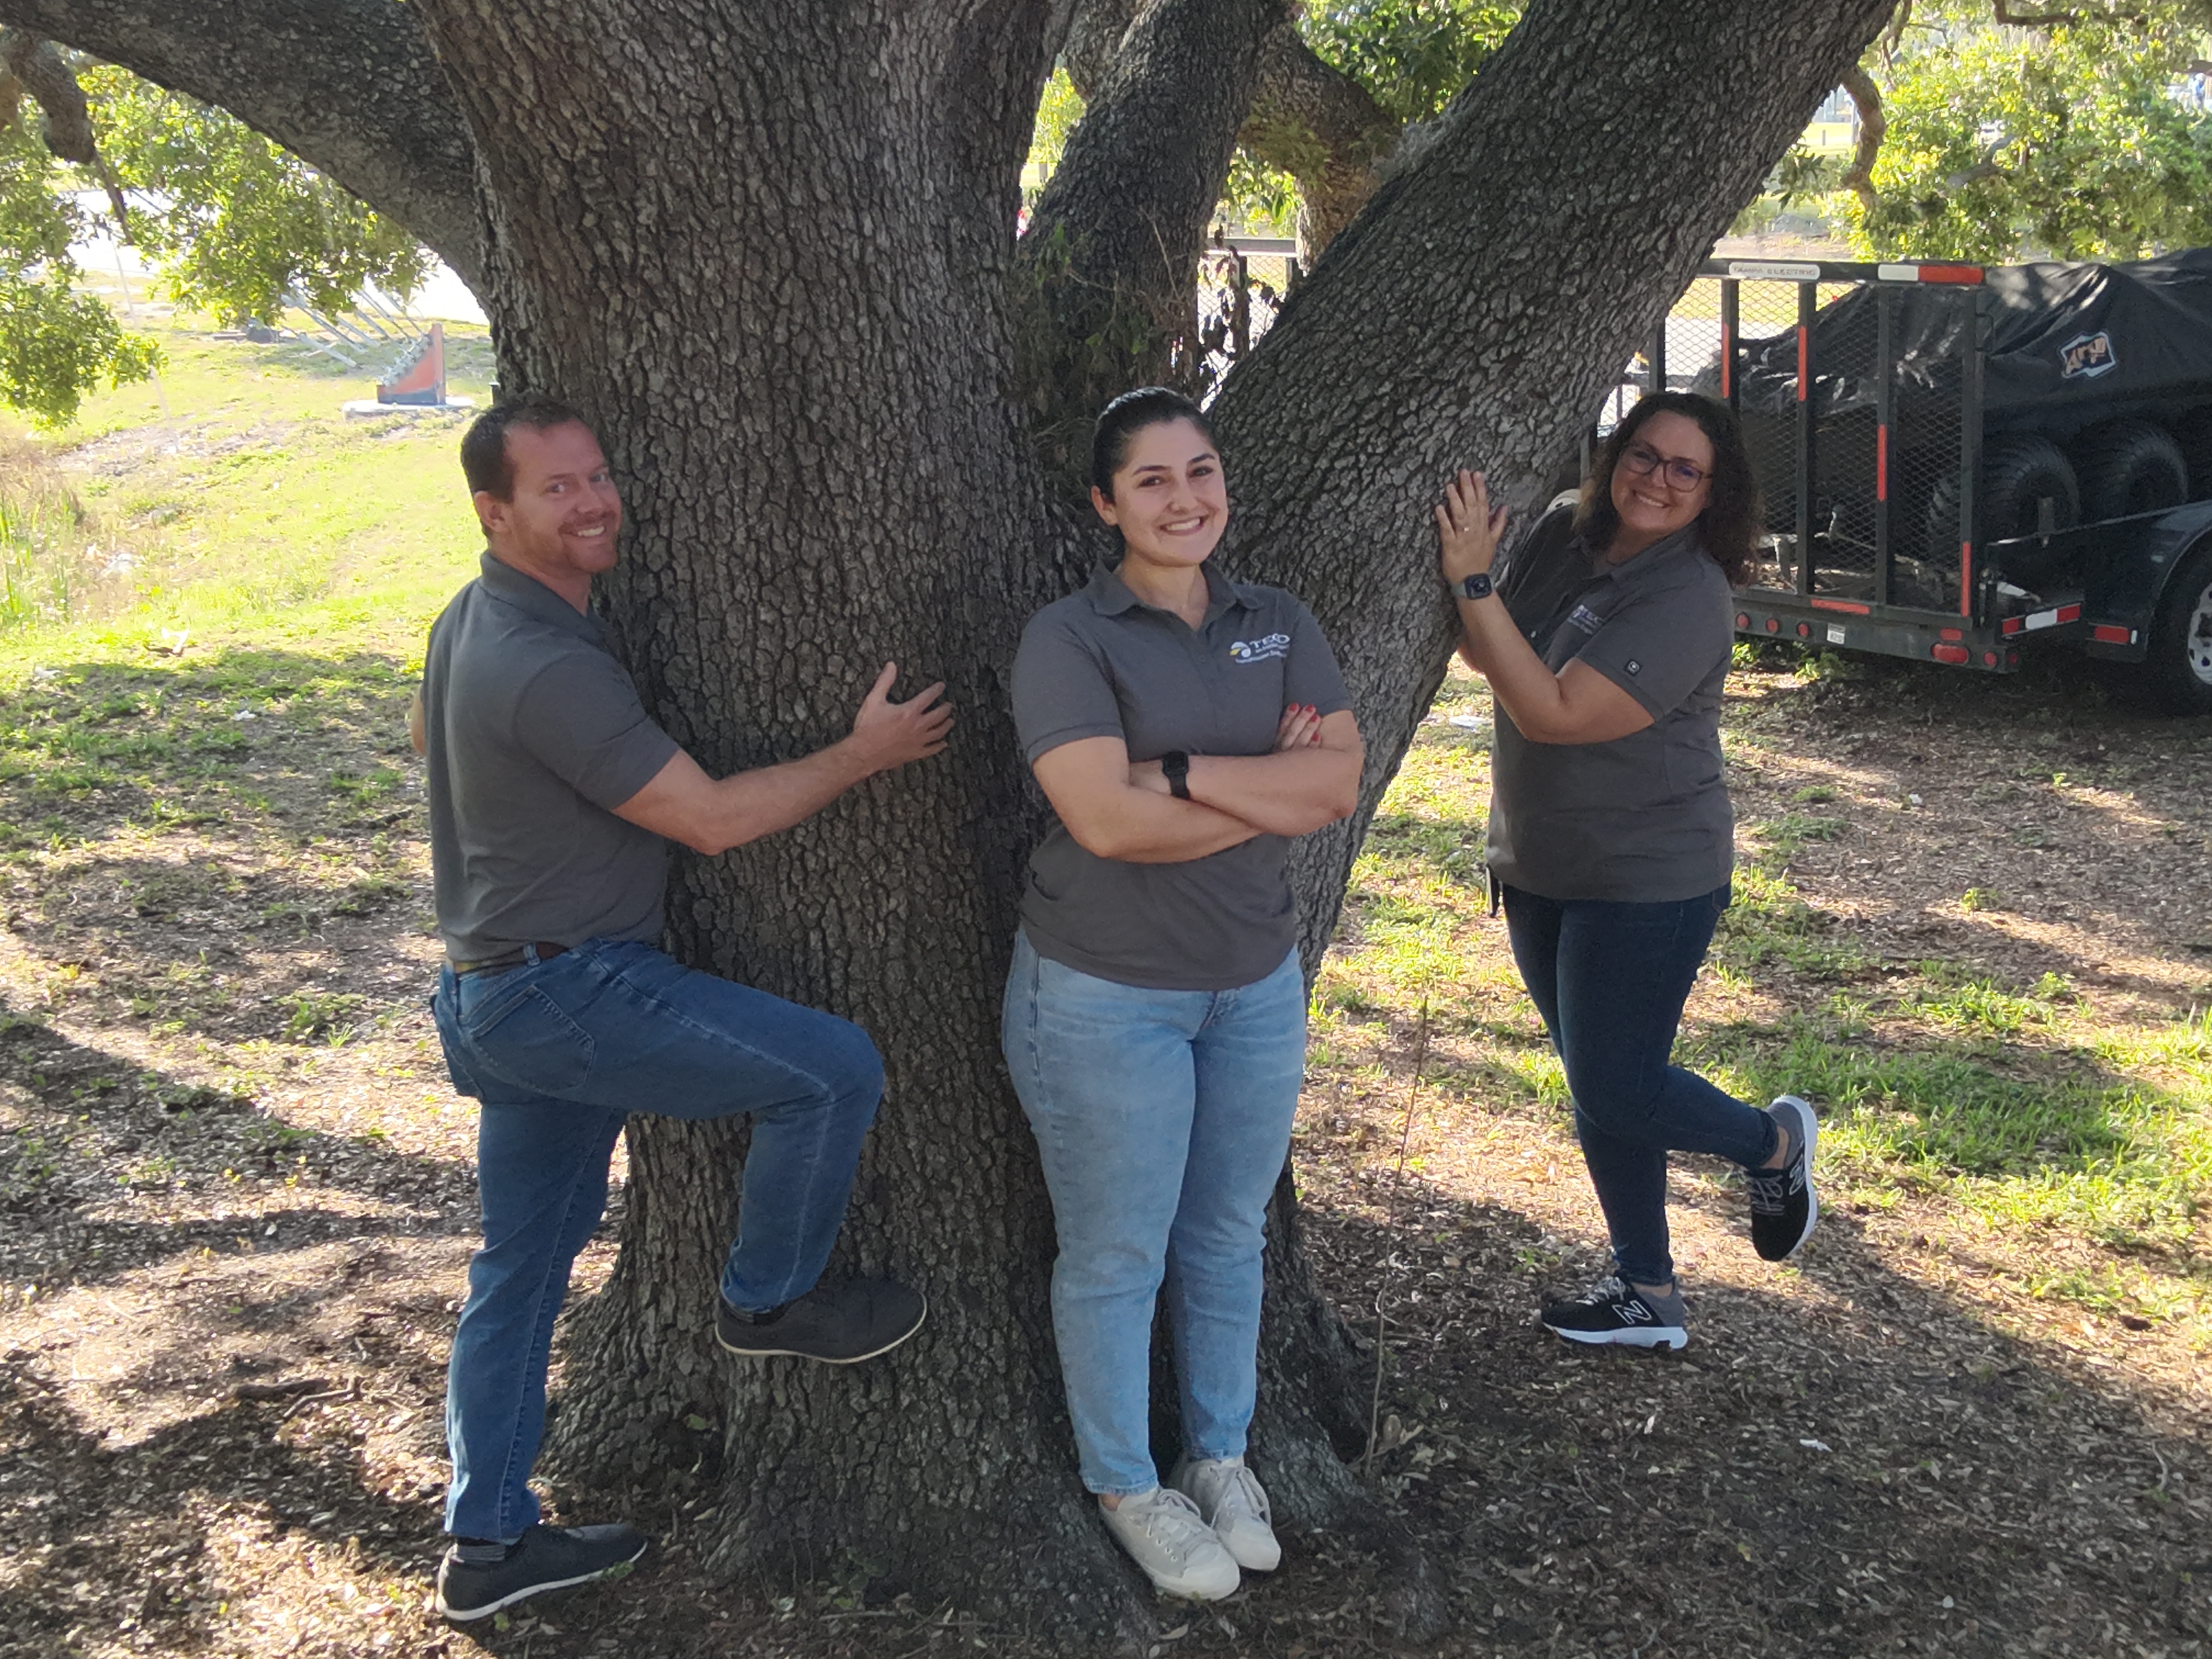 One of our Transmission Operations drones caught Kylie Cordova (middle) and her tree-hugging teammates all smiles.